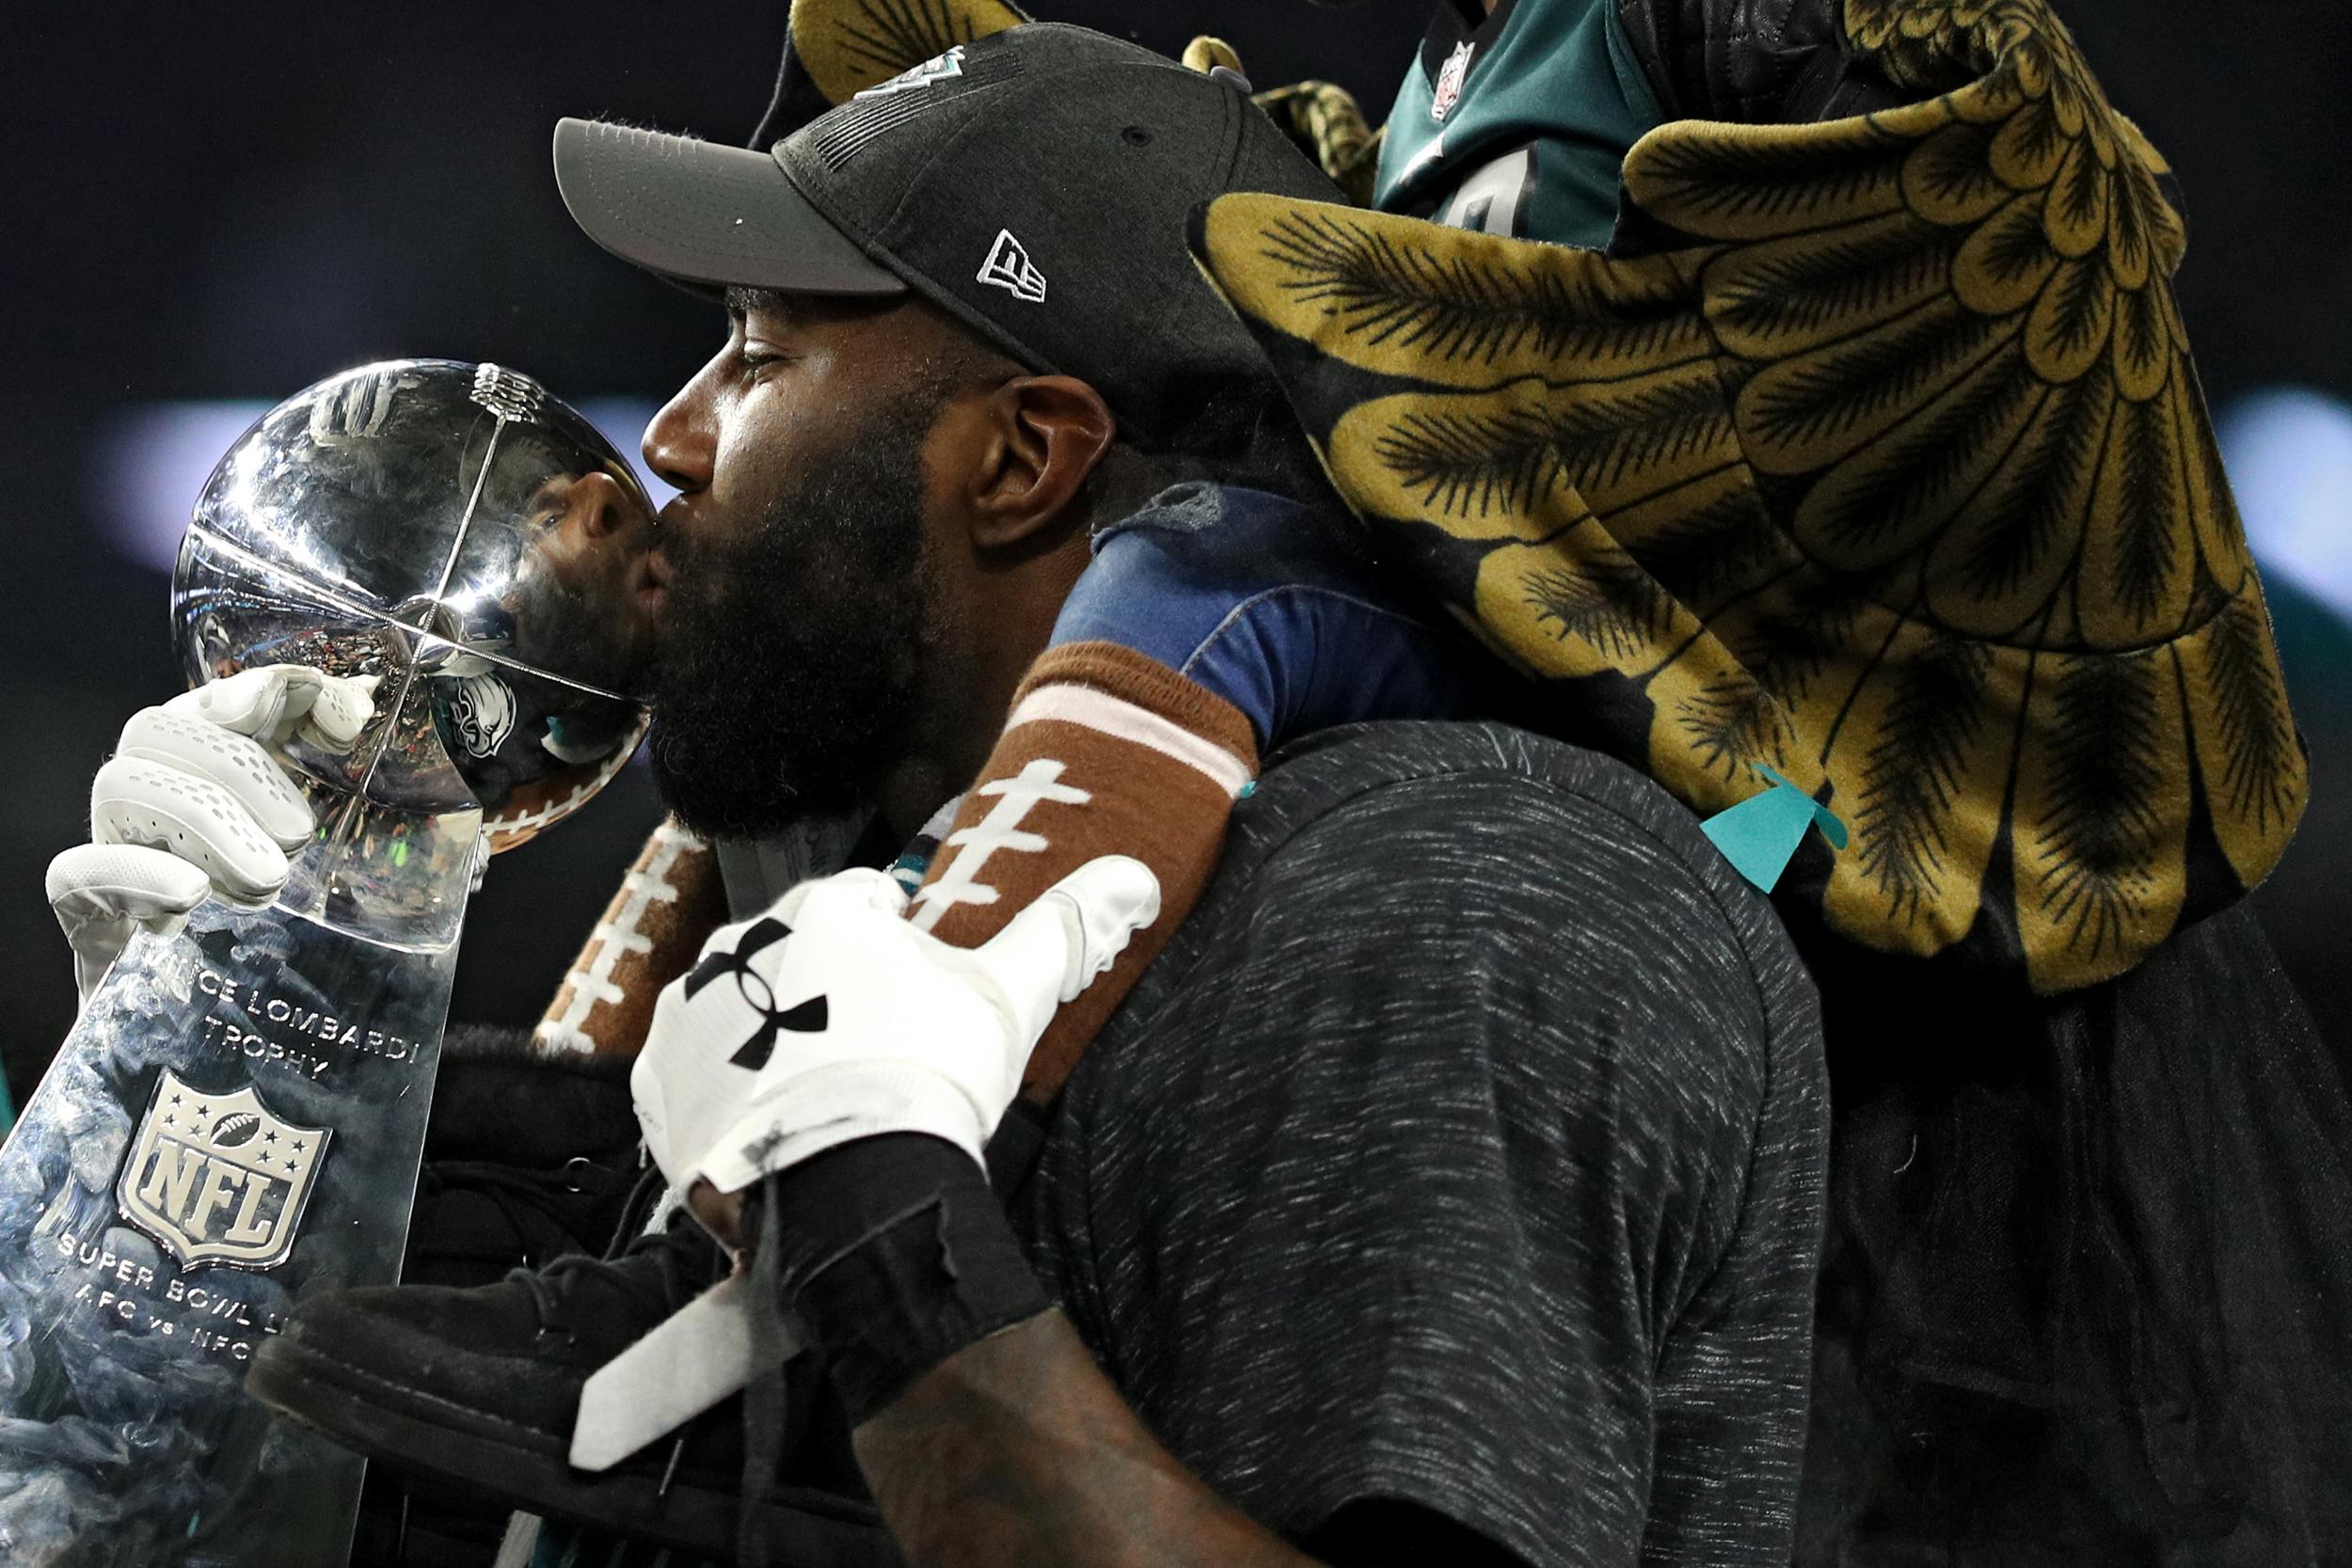 Malcolm Jenkins kisses the Lombardi trophy after winning the Super Bowl